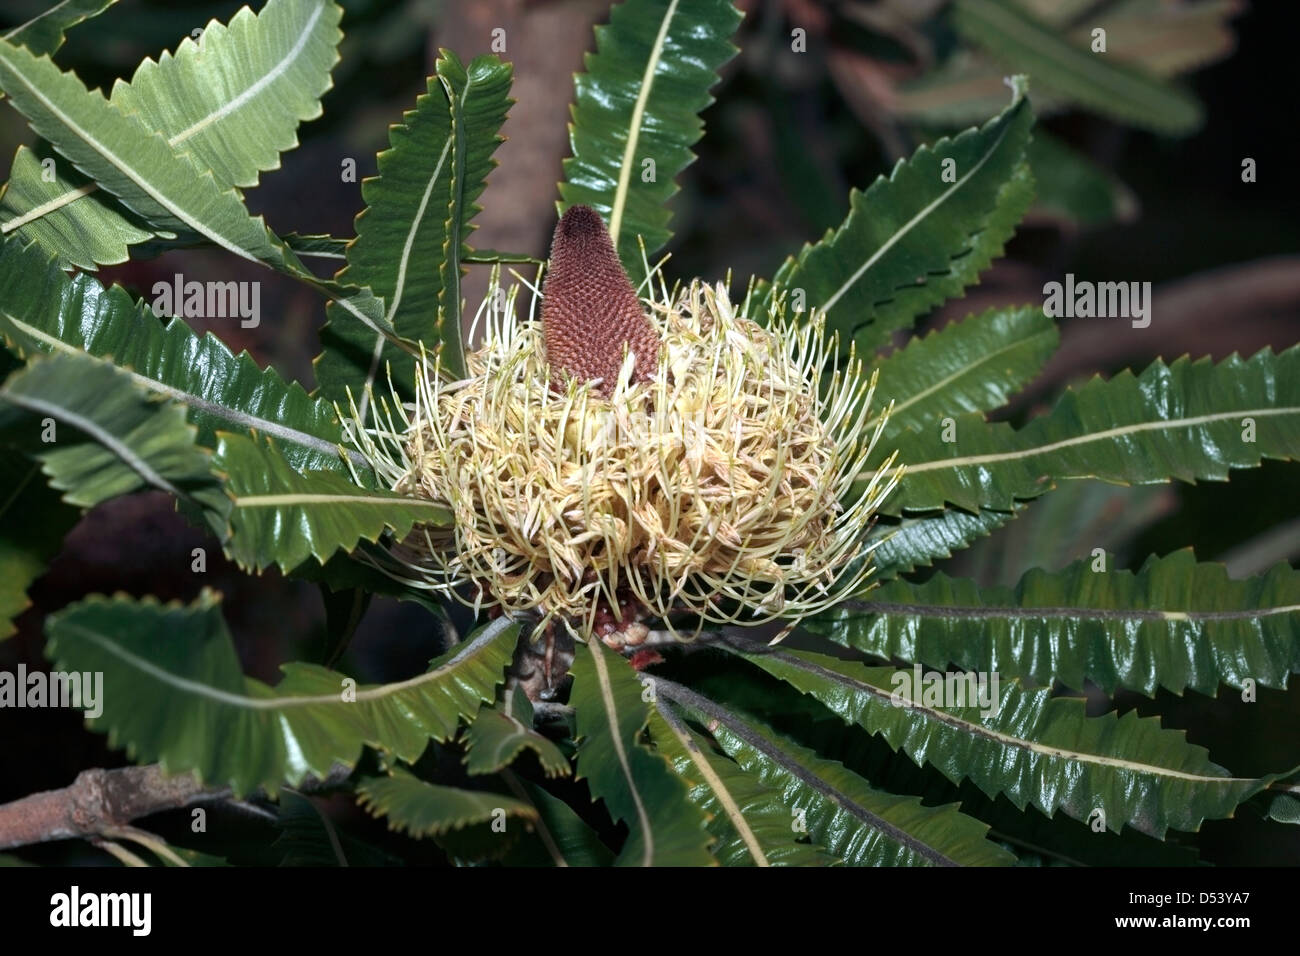 Saw Banksia early growth of flower spike/ Banksia serrata -Family Proteaceae Stock Photo